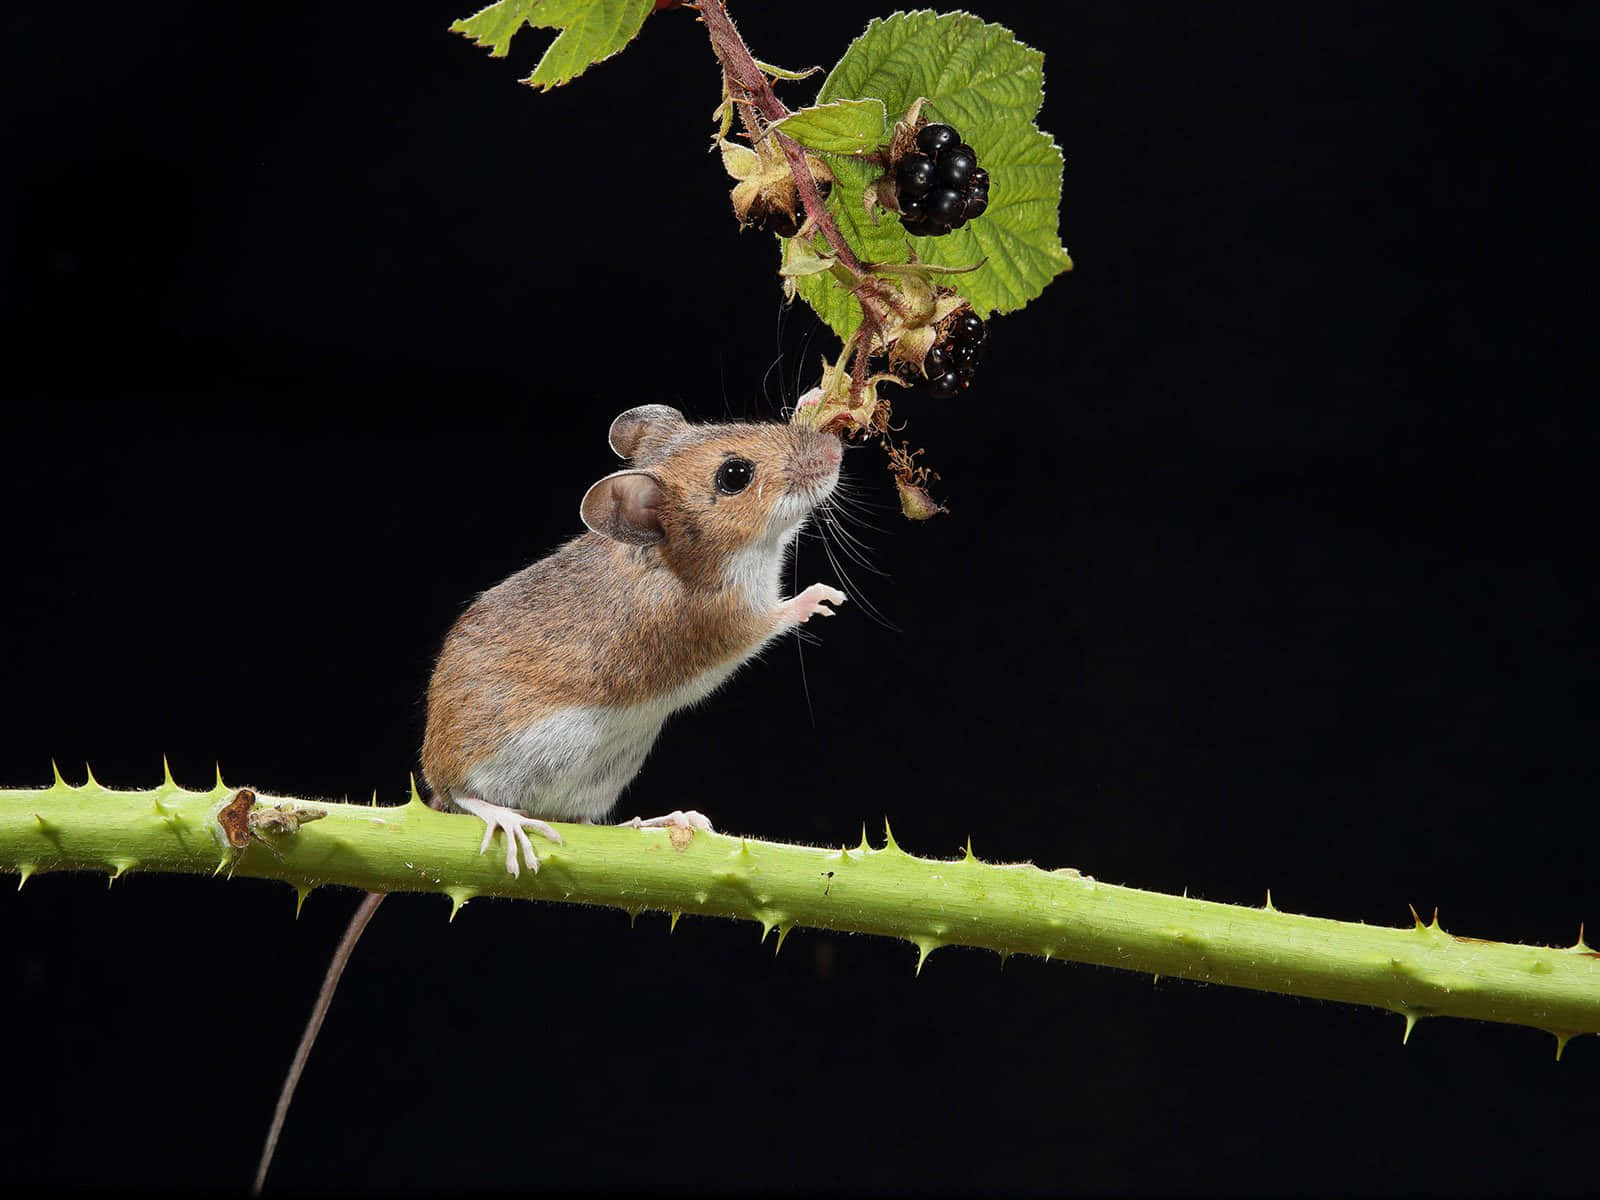 A Mouse Is Eating Berries On A Plant